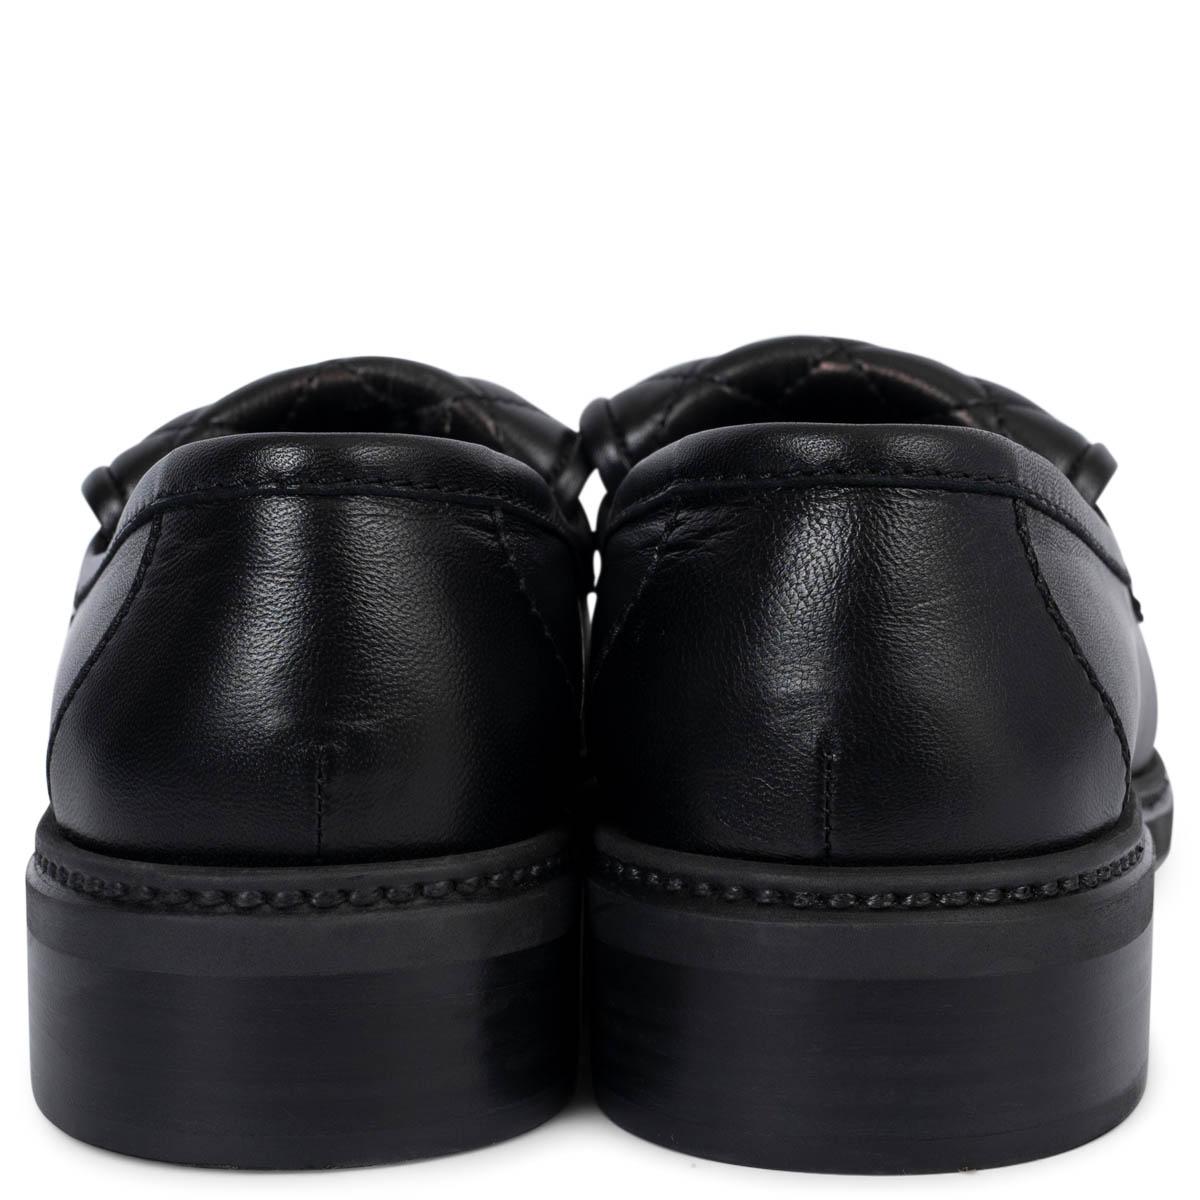 CHANEL black leather REV TURNLOCK Loafers Shoes 39 For Sale 1